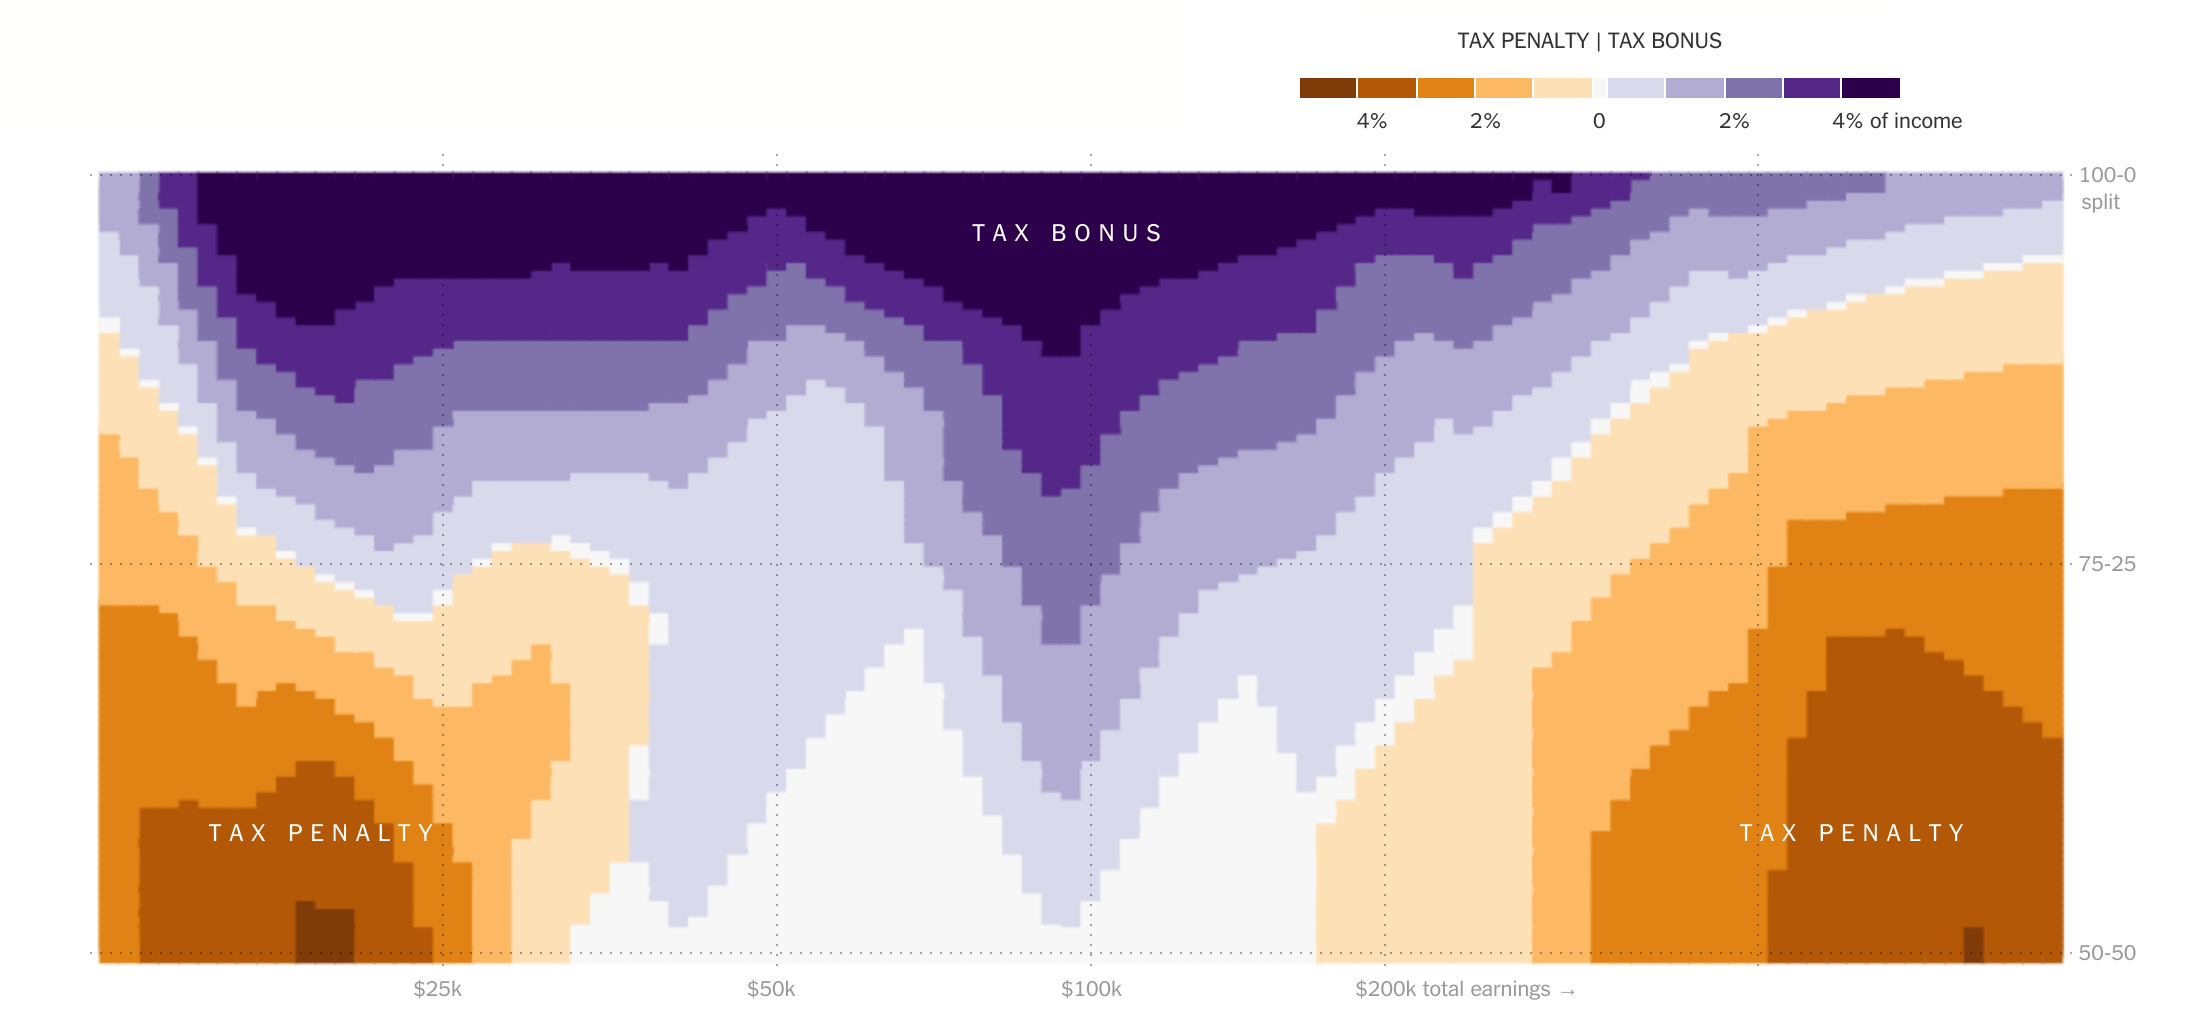 A strange, convoluted heatmap; the key indicates that the value varies from "-4% of income" to "+4% of income".